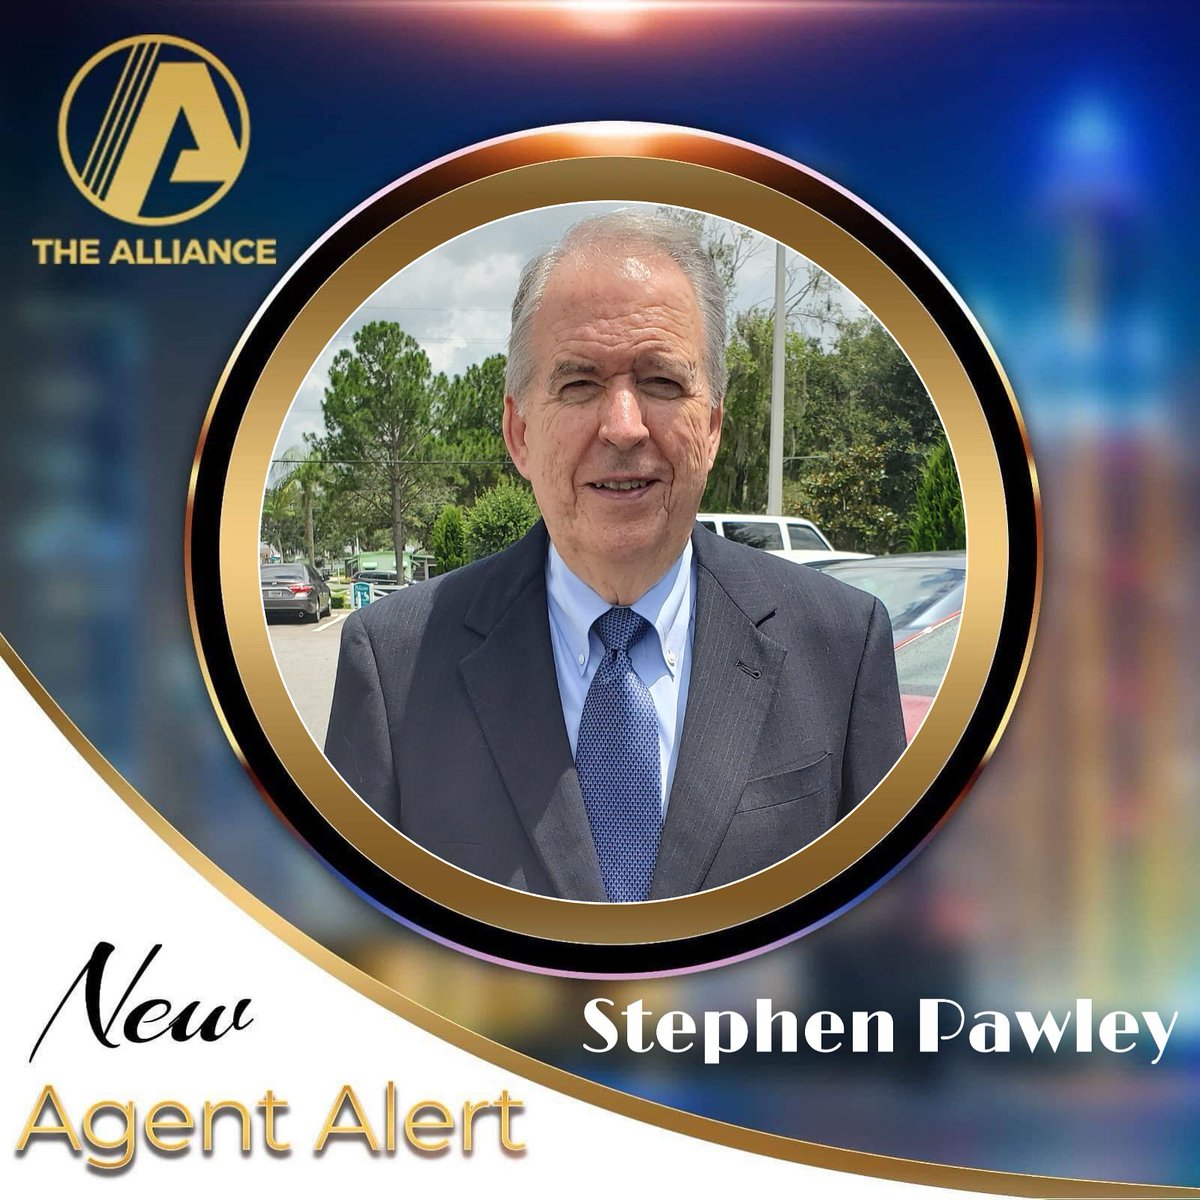 Stephen Pawley approached me after he seen the value in what we do and expressed a desire to help educate with financial literacy.  #letsgetit #itswinningseason #hardwork #noexcusesonlyresultscount  #love #momentum #teamwork #entrepreneur #teamworkmakesthedreamwork #leadership